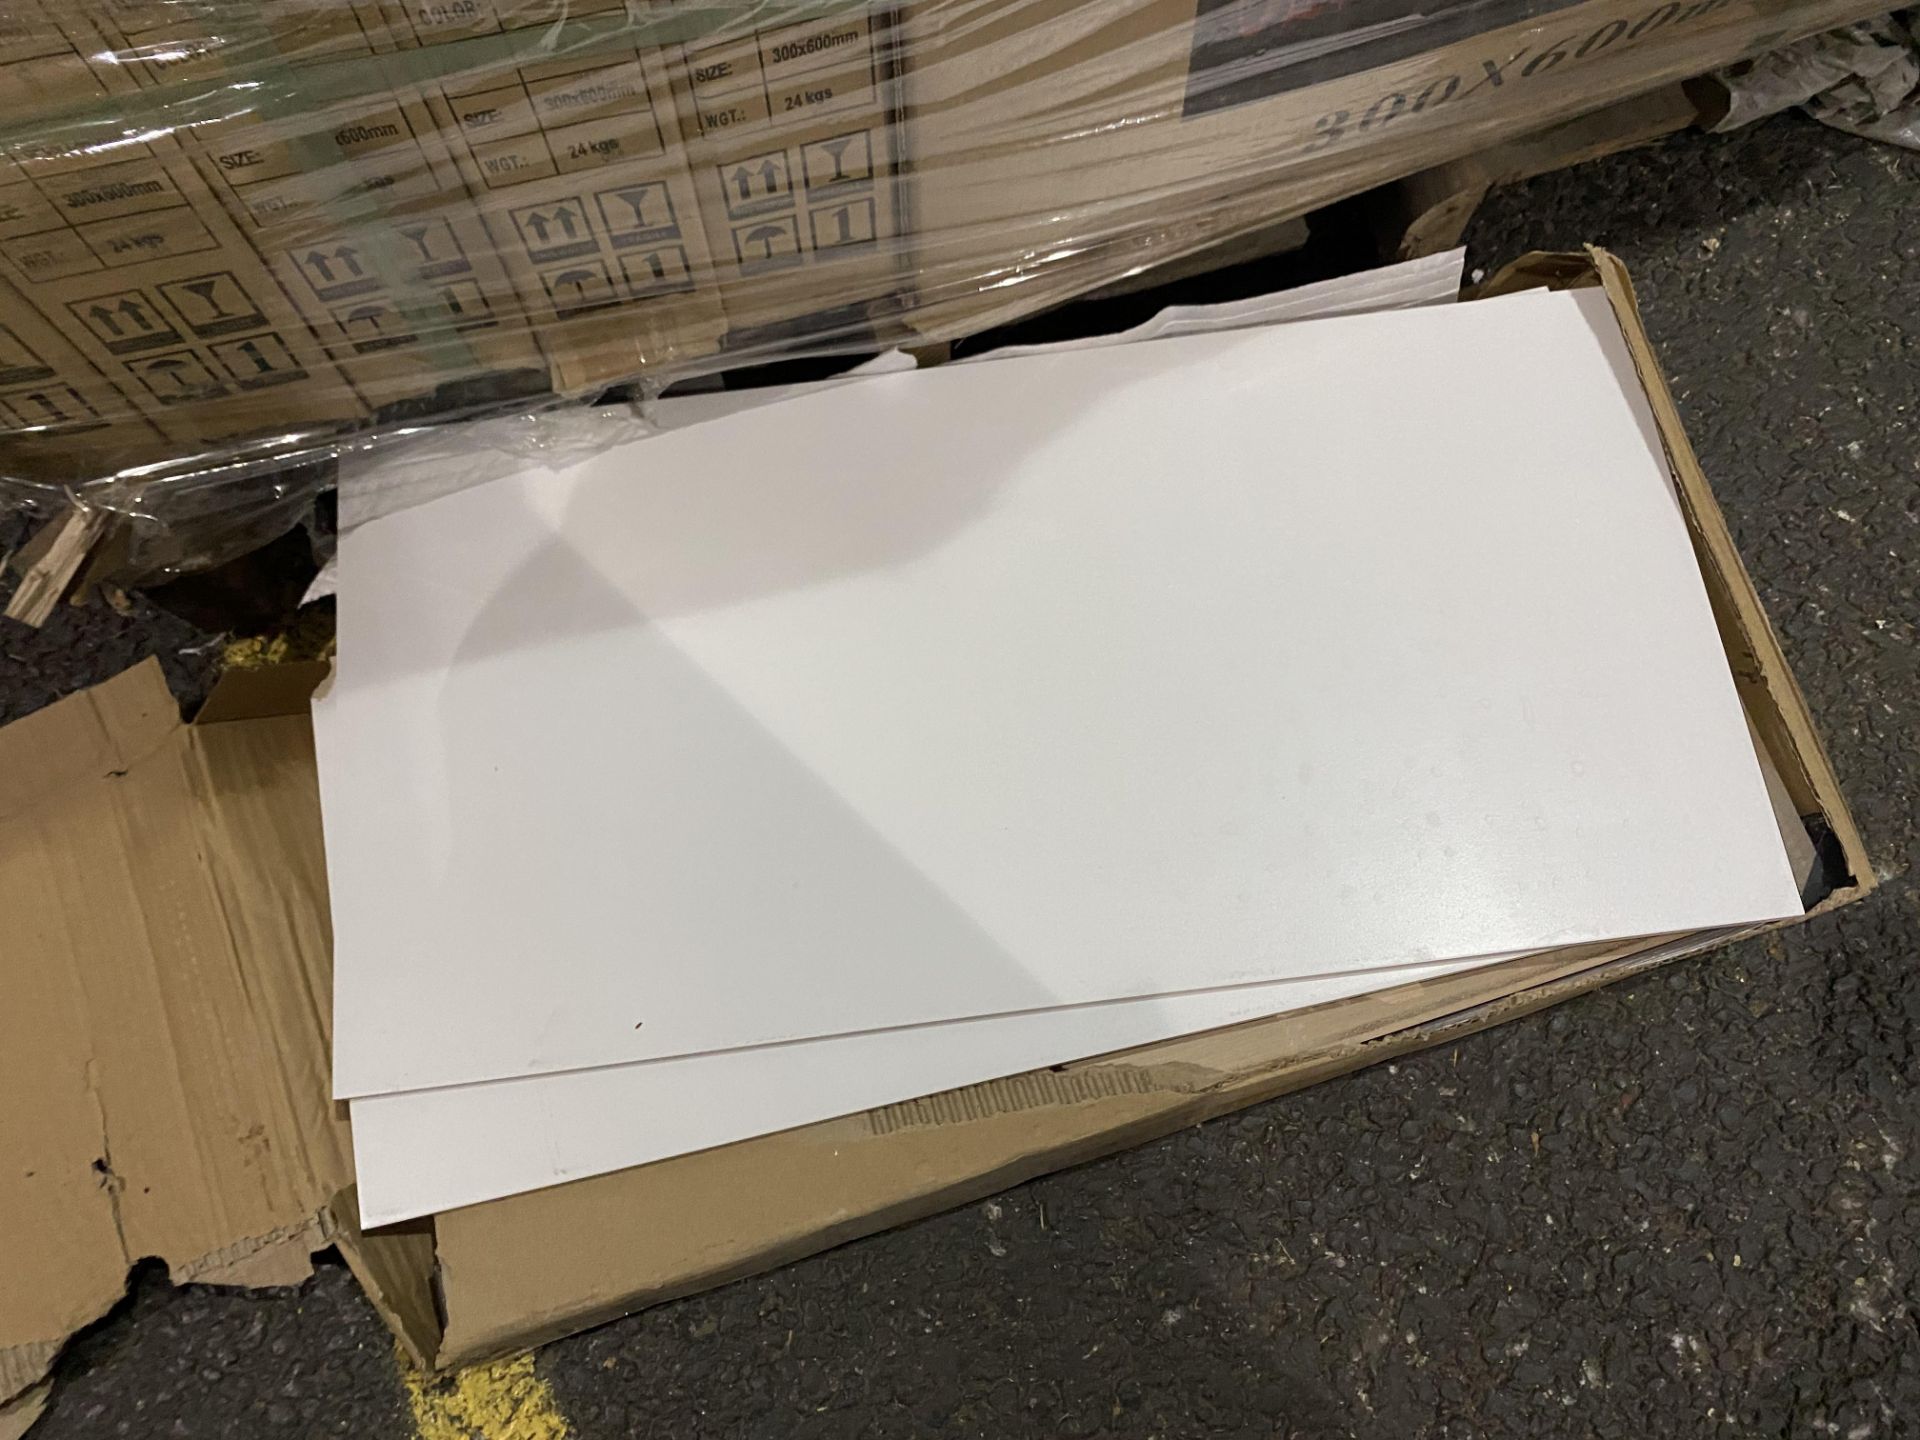 60 Boxes of White Ceramic Wall Tiles, item no. JY3 - Image 2 of 3